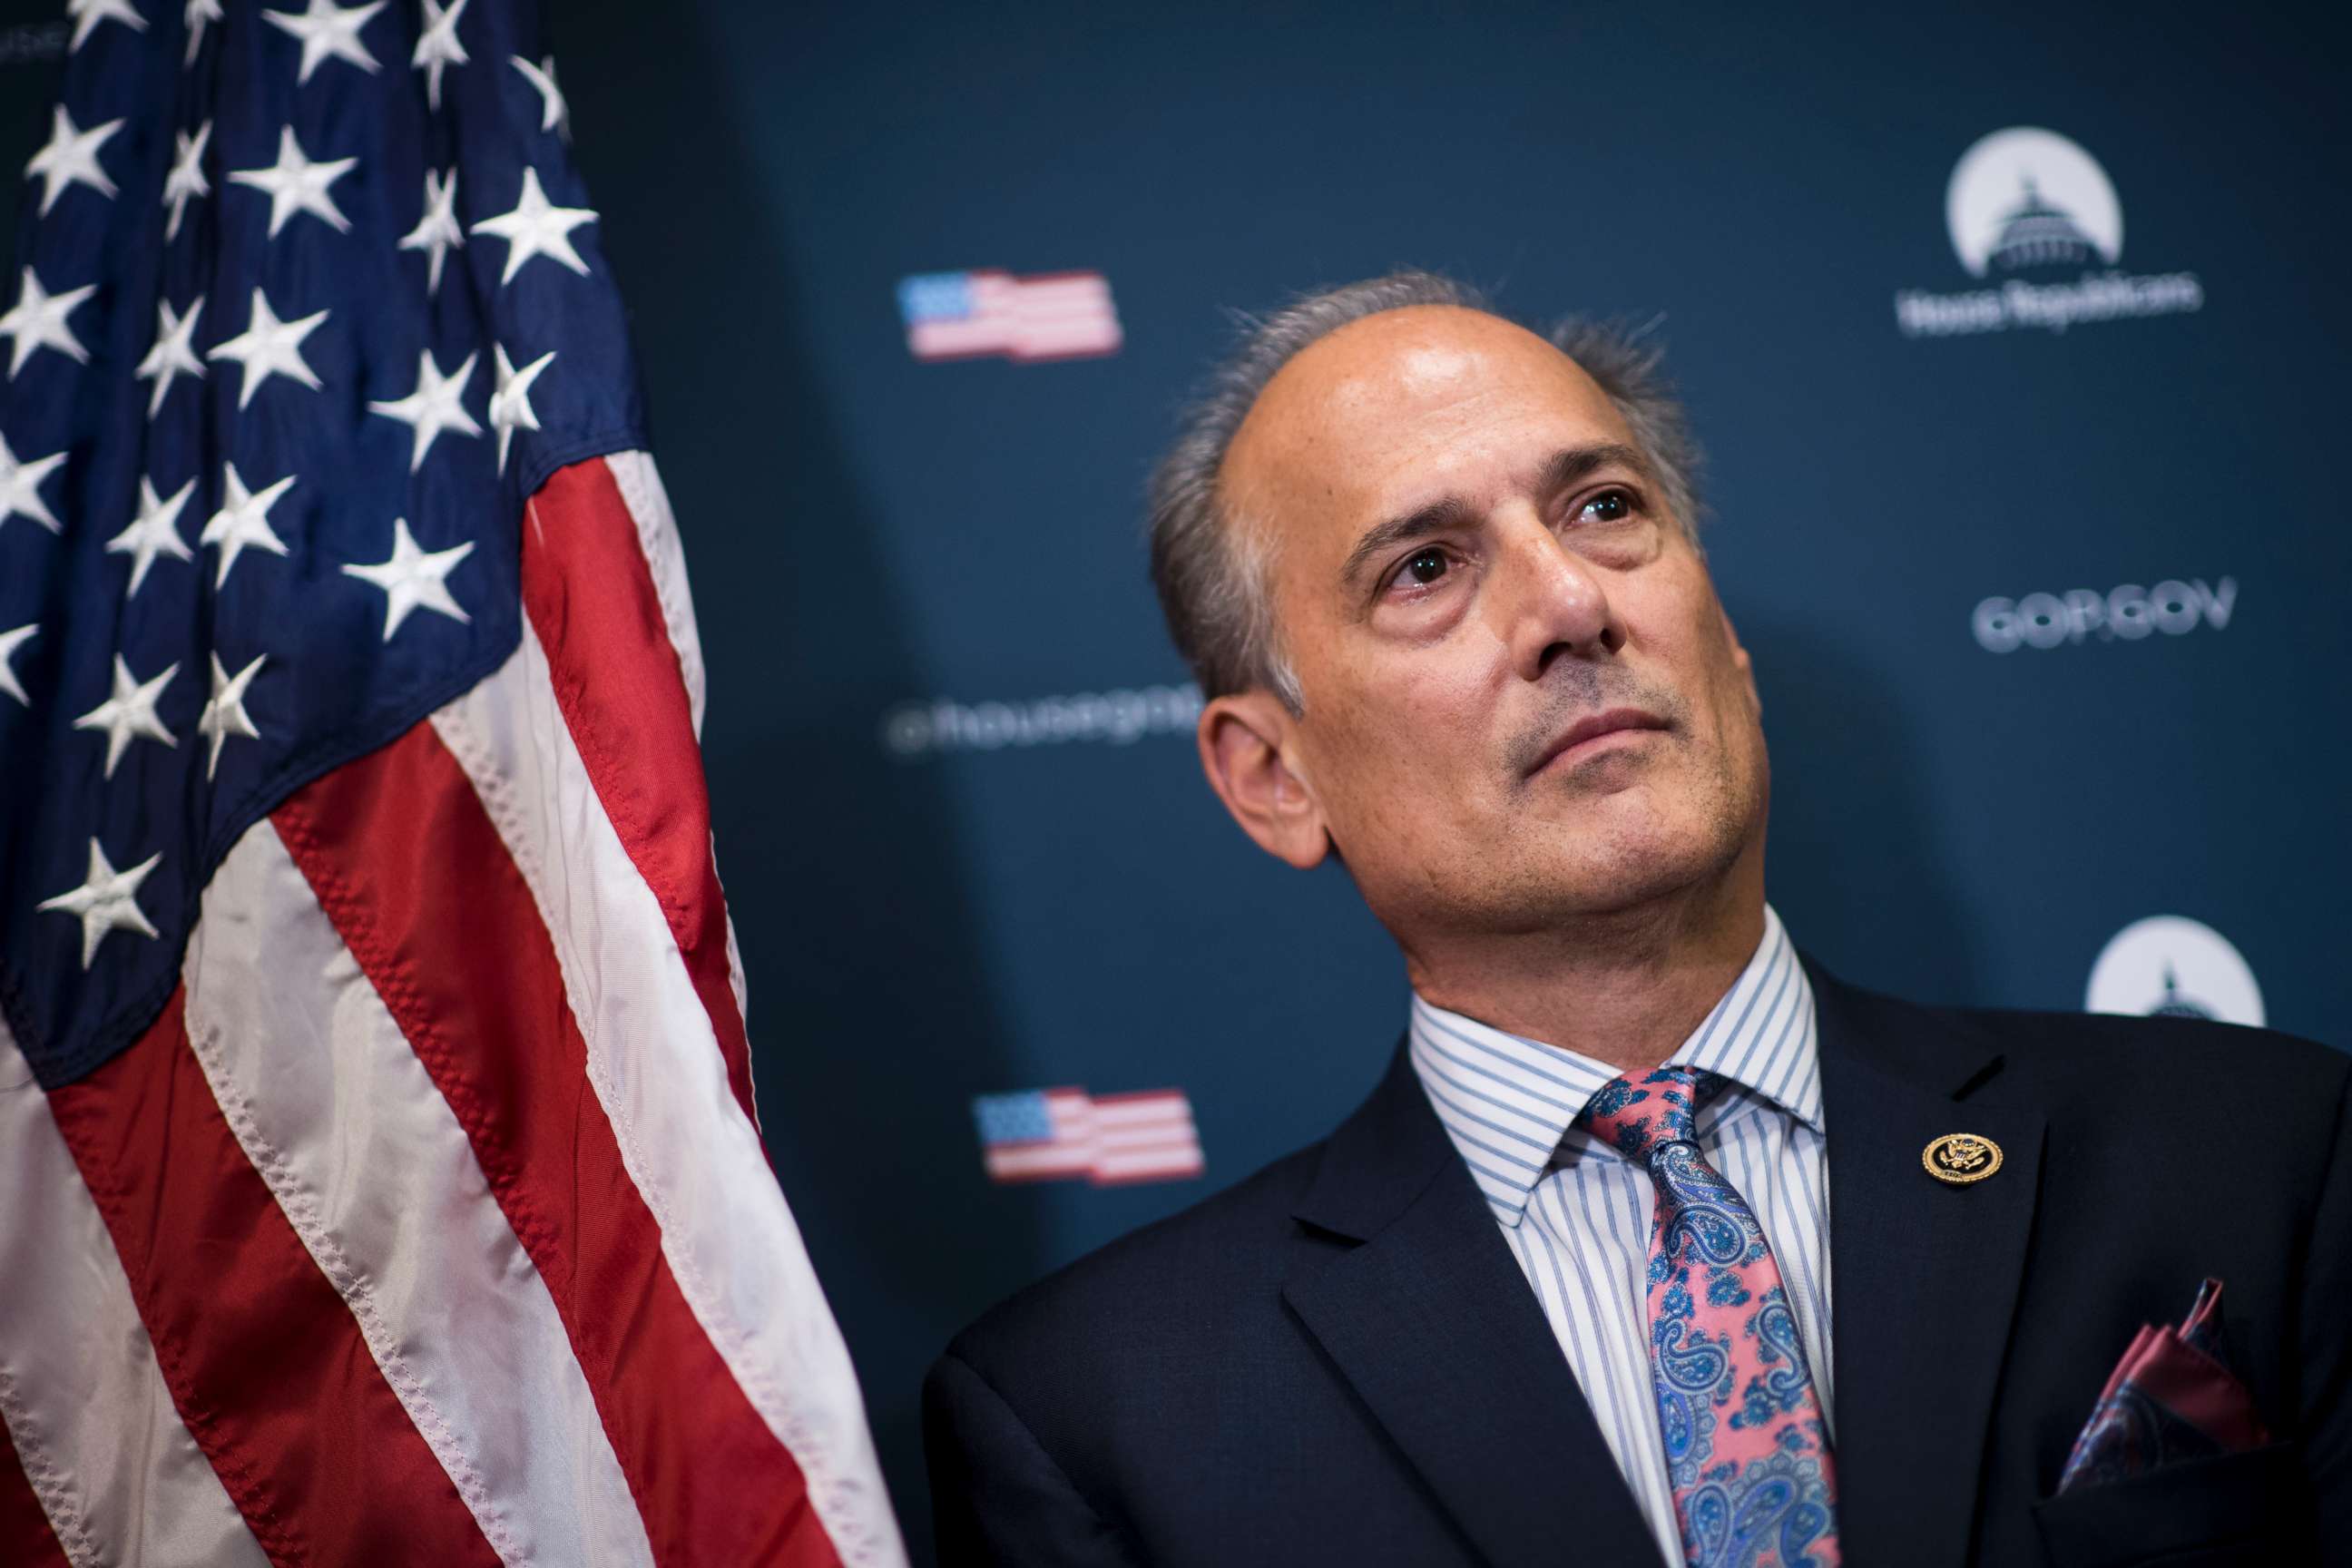 PHOTO: Rep. Tom Marino, R-Pa., participates in the House GOP leadership press conference at the Capitol, Sept. 27, 2016.